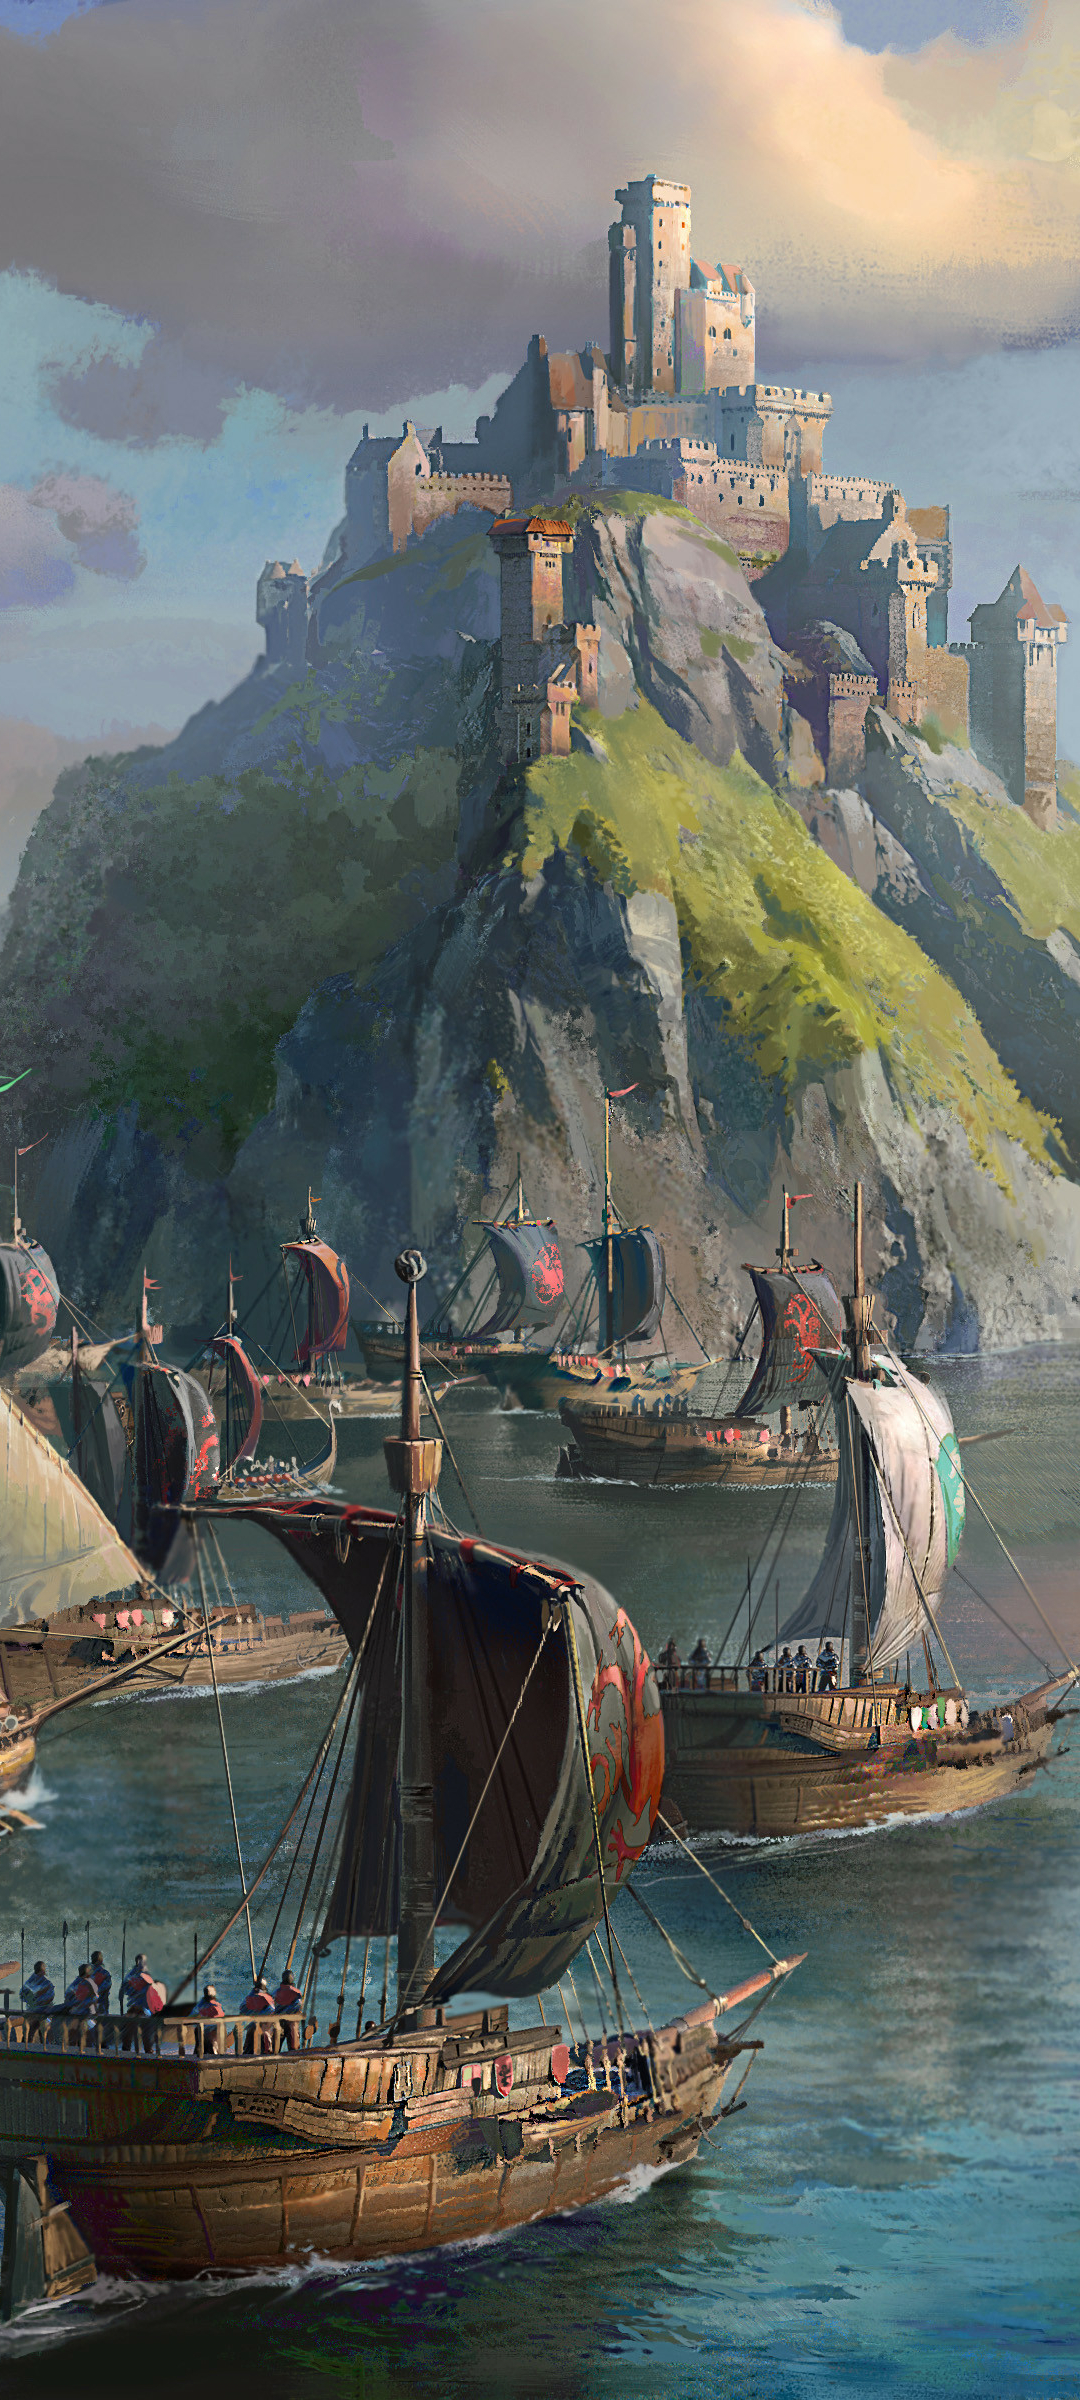 Ships Approach Tarth - The Rise of the Dragon by Wei Guan